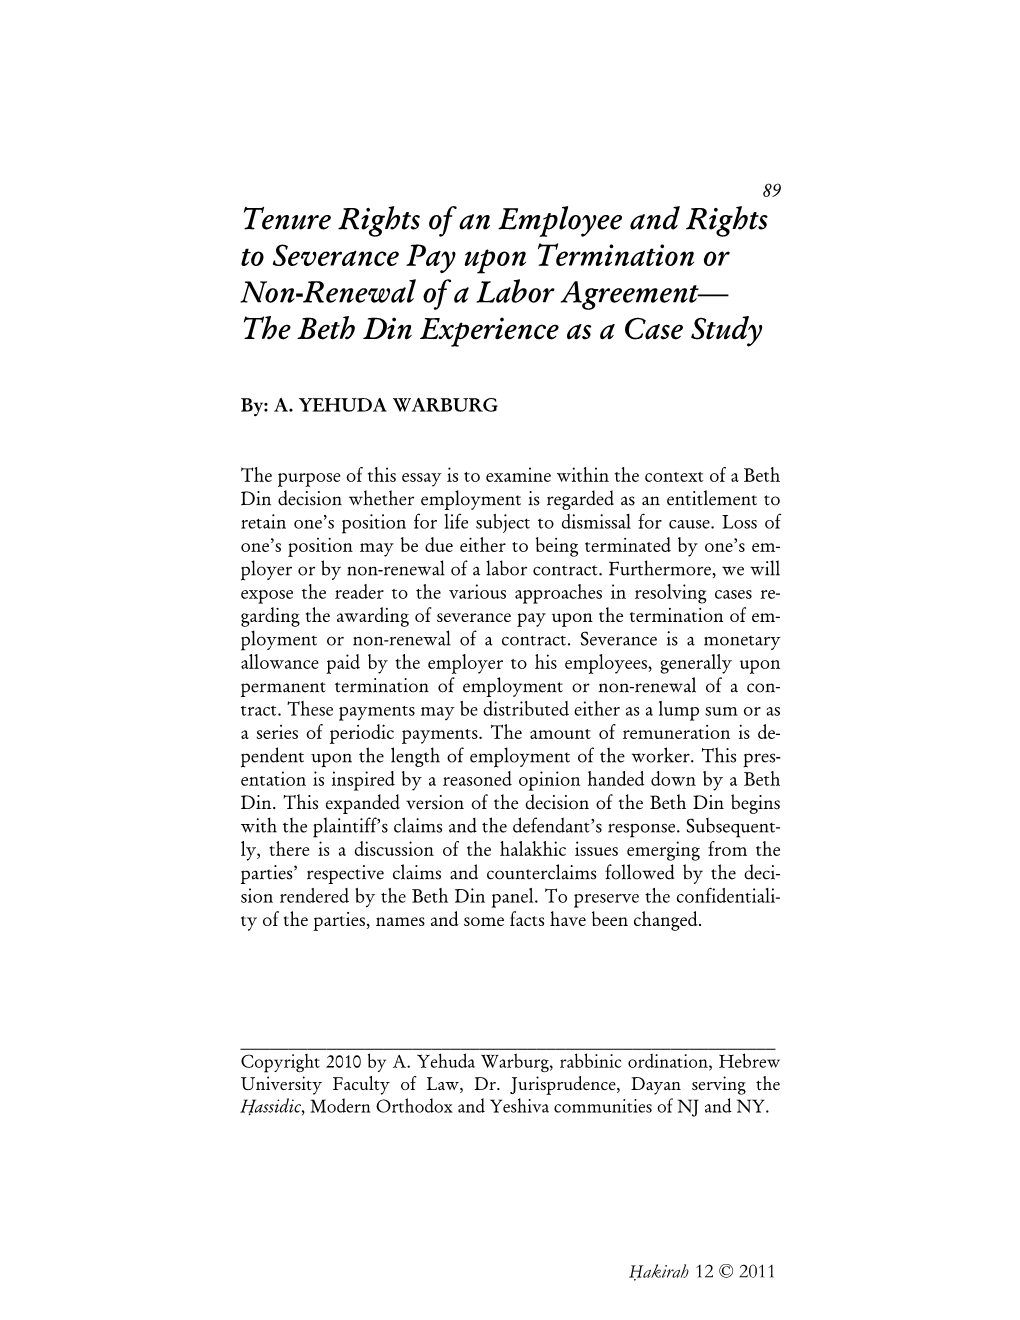 Tenure Rights of an Employee and Rights to Severance Pay Upon Termination Or Non-Renewal of a Labor Agreement— the Beth Din Experience As a Case Study